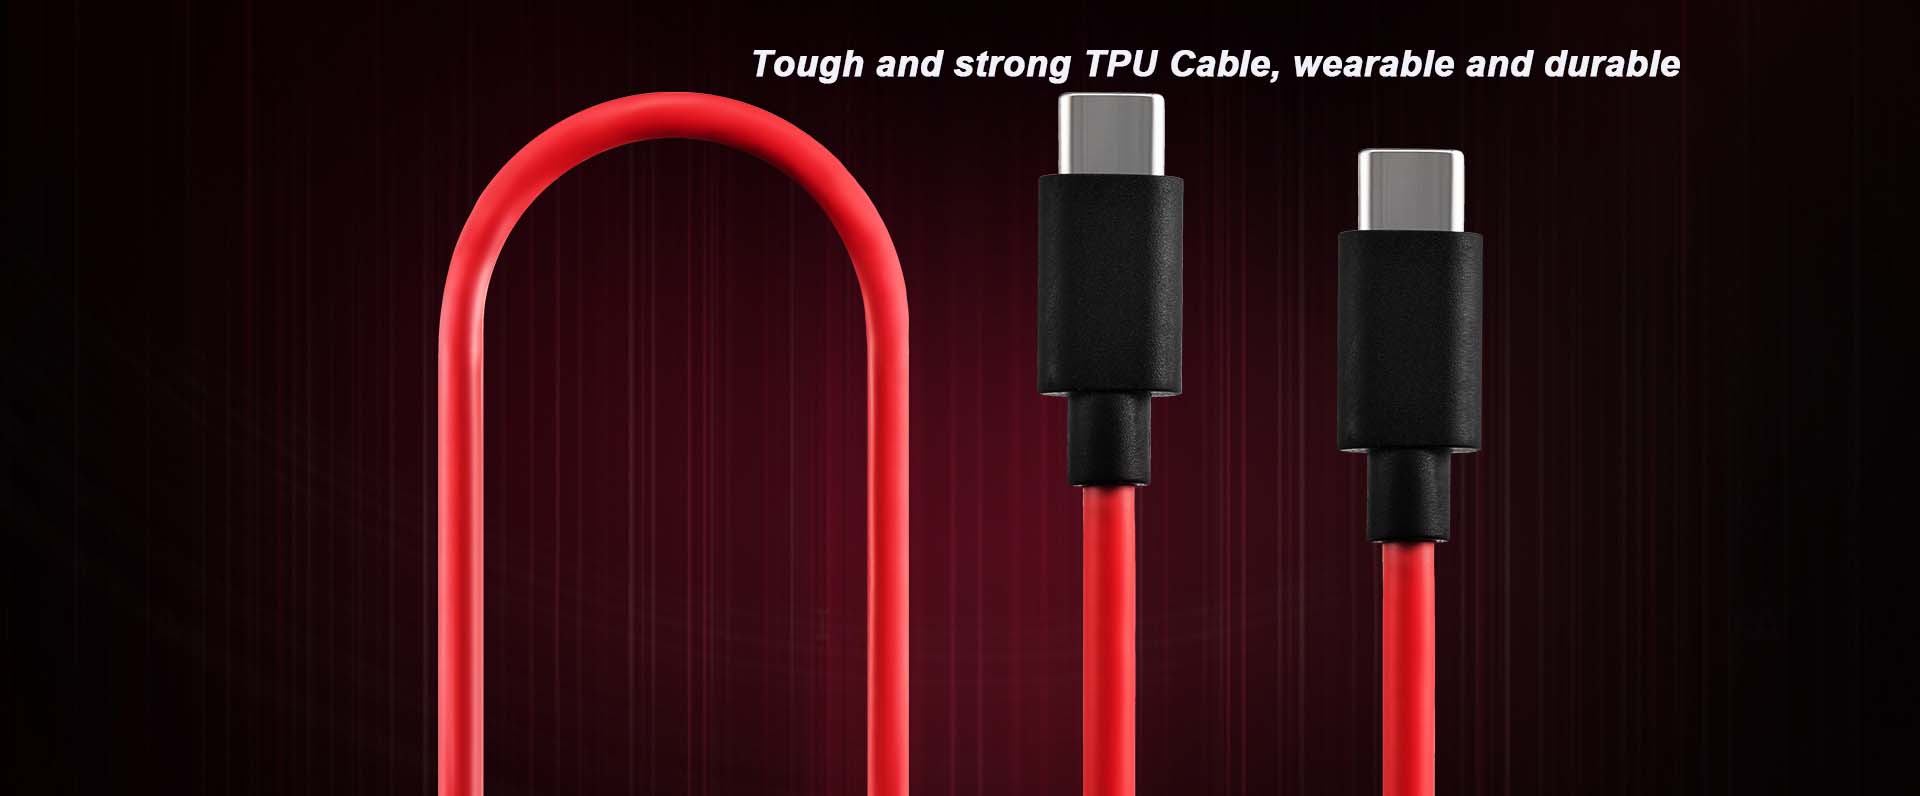 Nubia cable